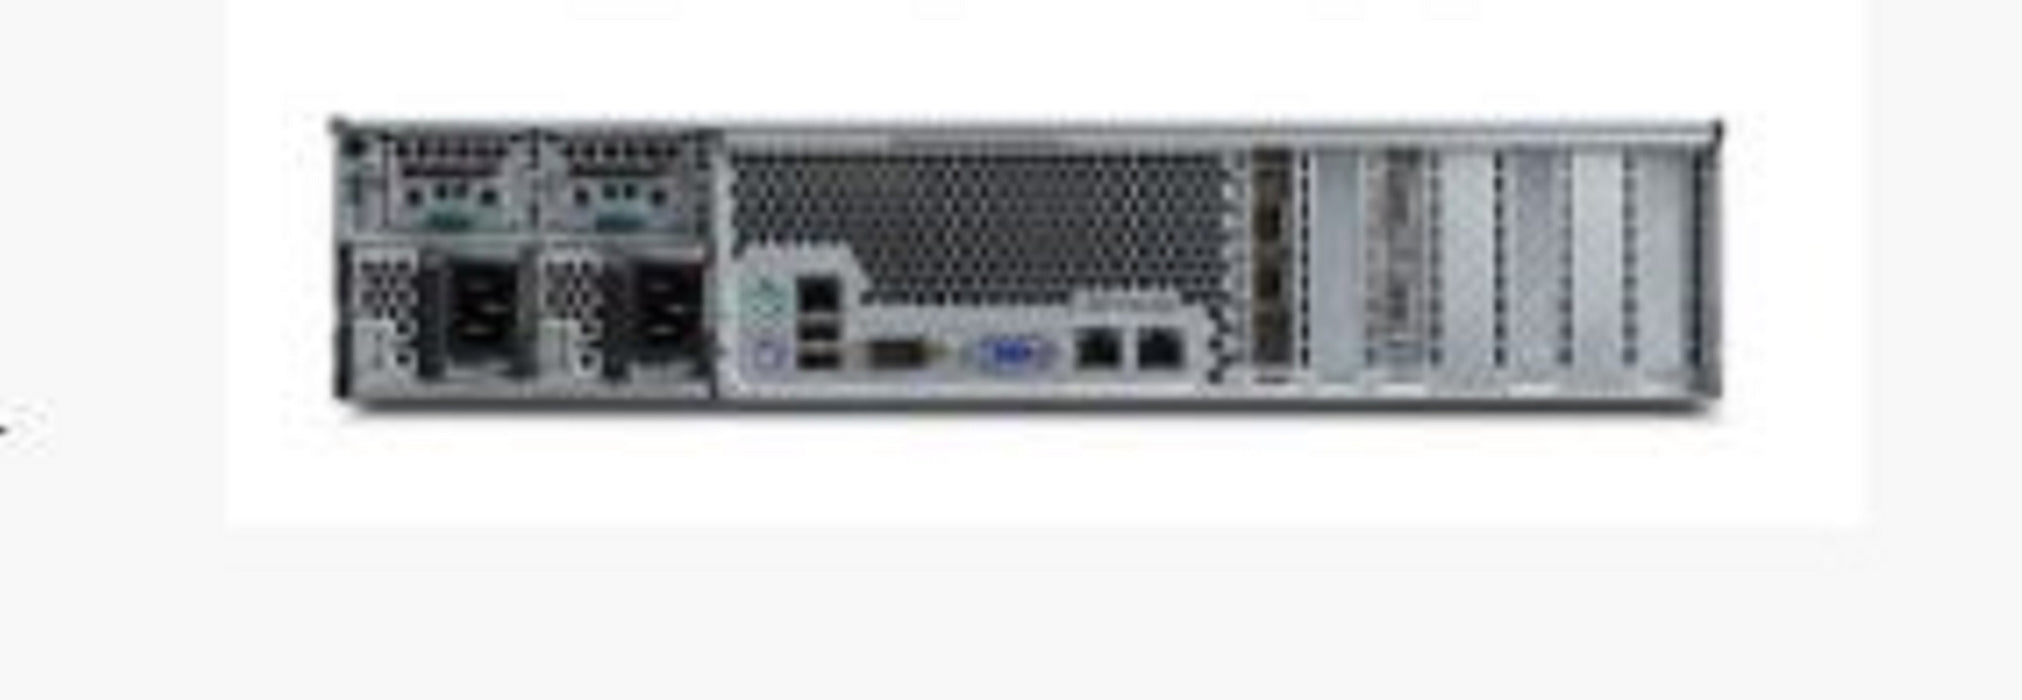 Isilon X200 144TB 6-Node Cluster with 2 x 8-Port Infiniband switches